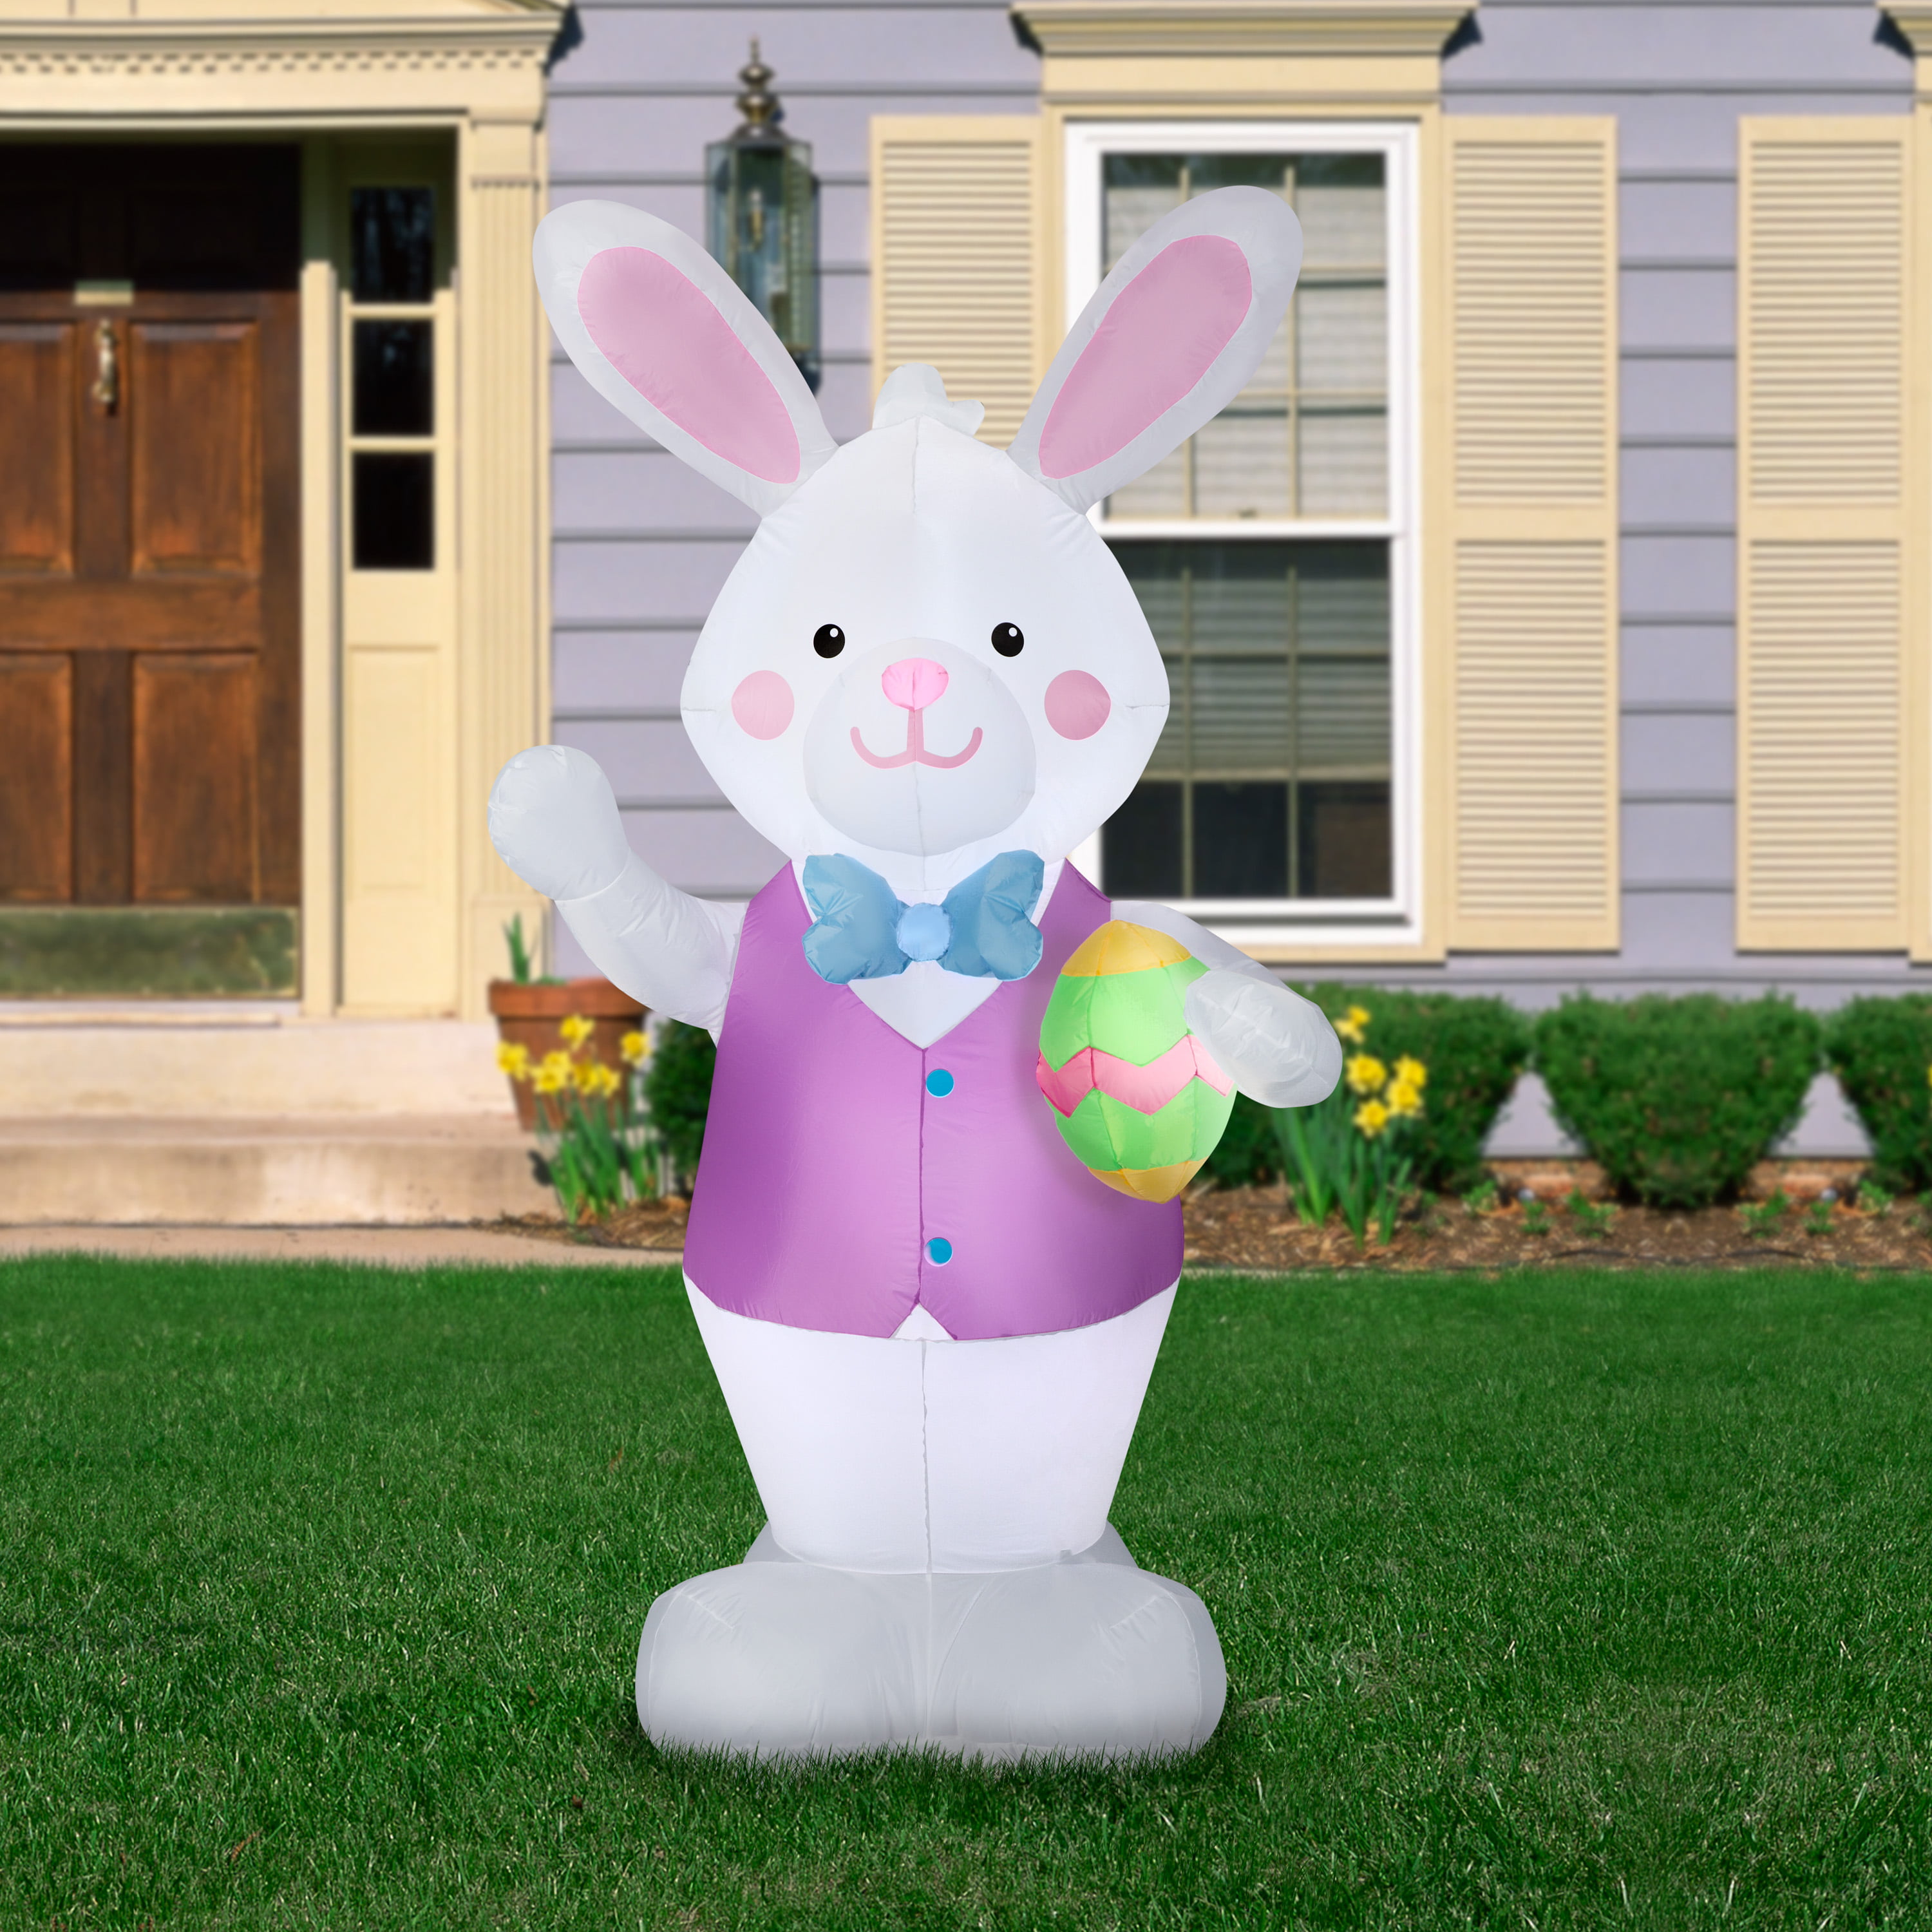 Ways to Celebrate Airblown Inflatable Bunny with Easter Egg 7